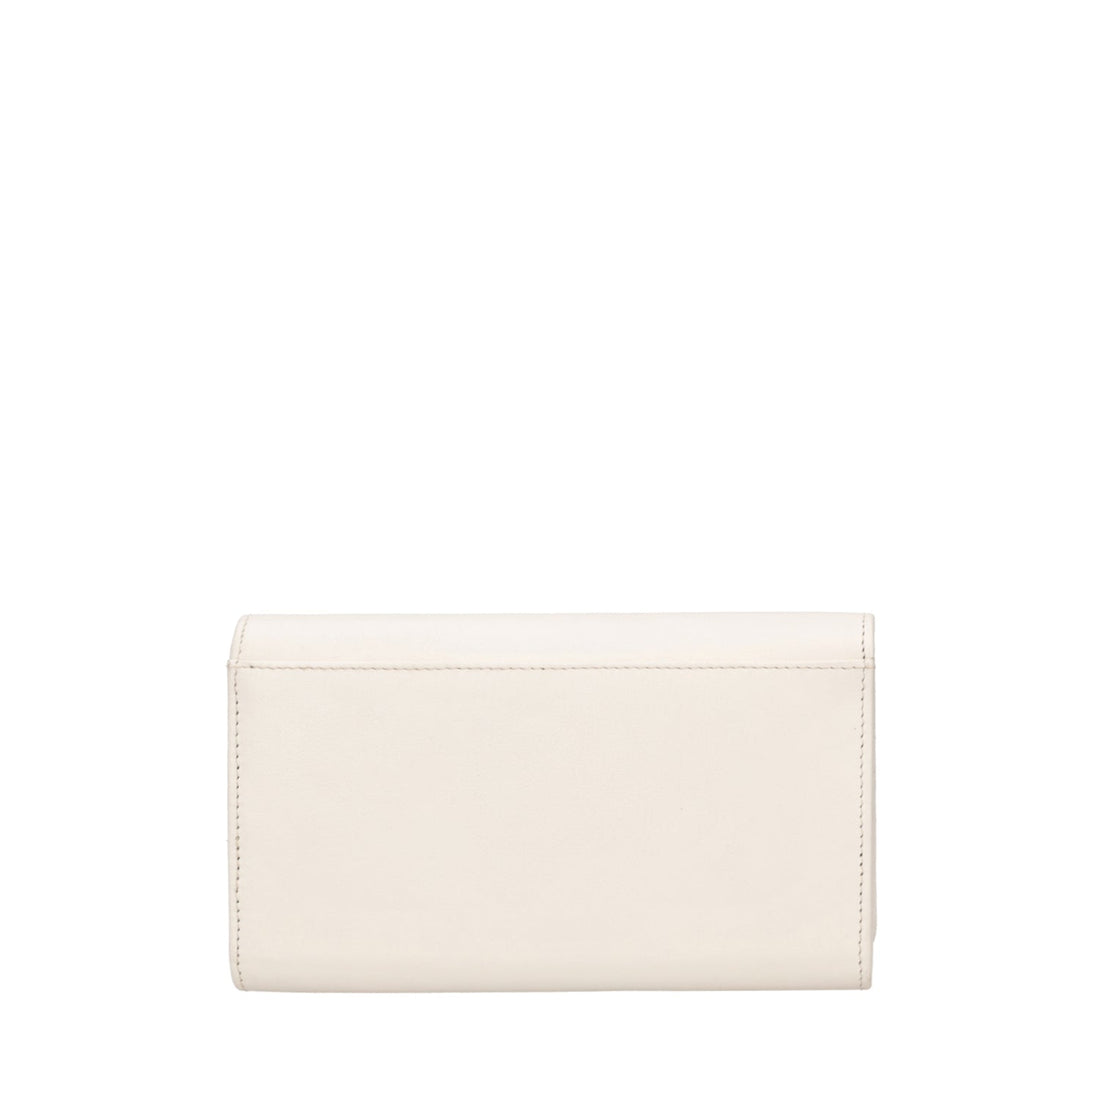 NATURAL LARGE BASIC WALLETS WALLET WITH FLAP